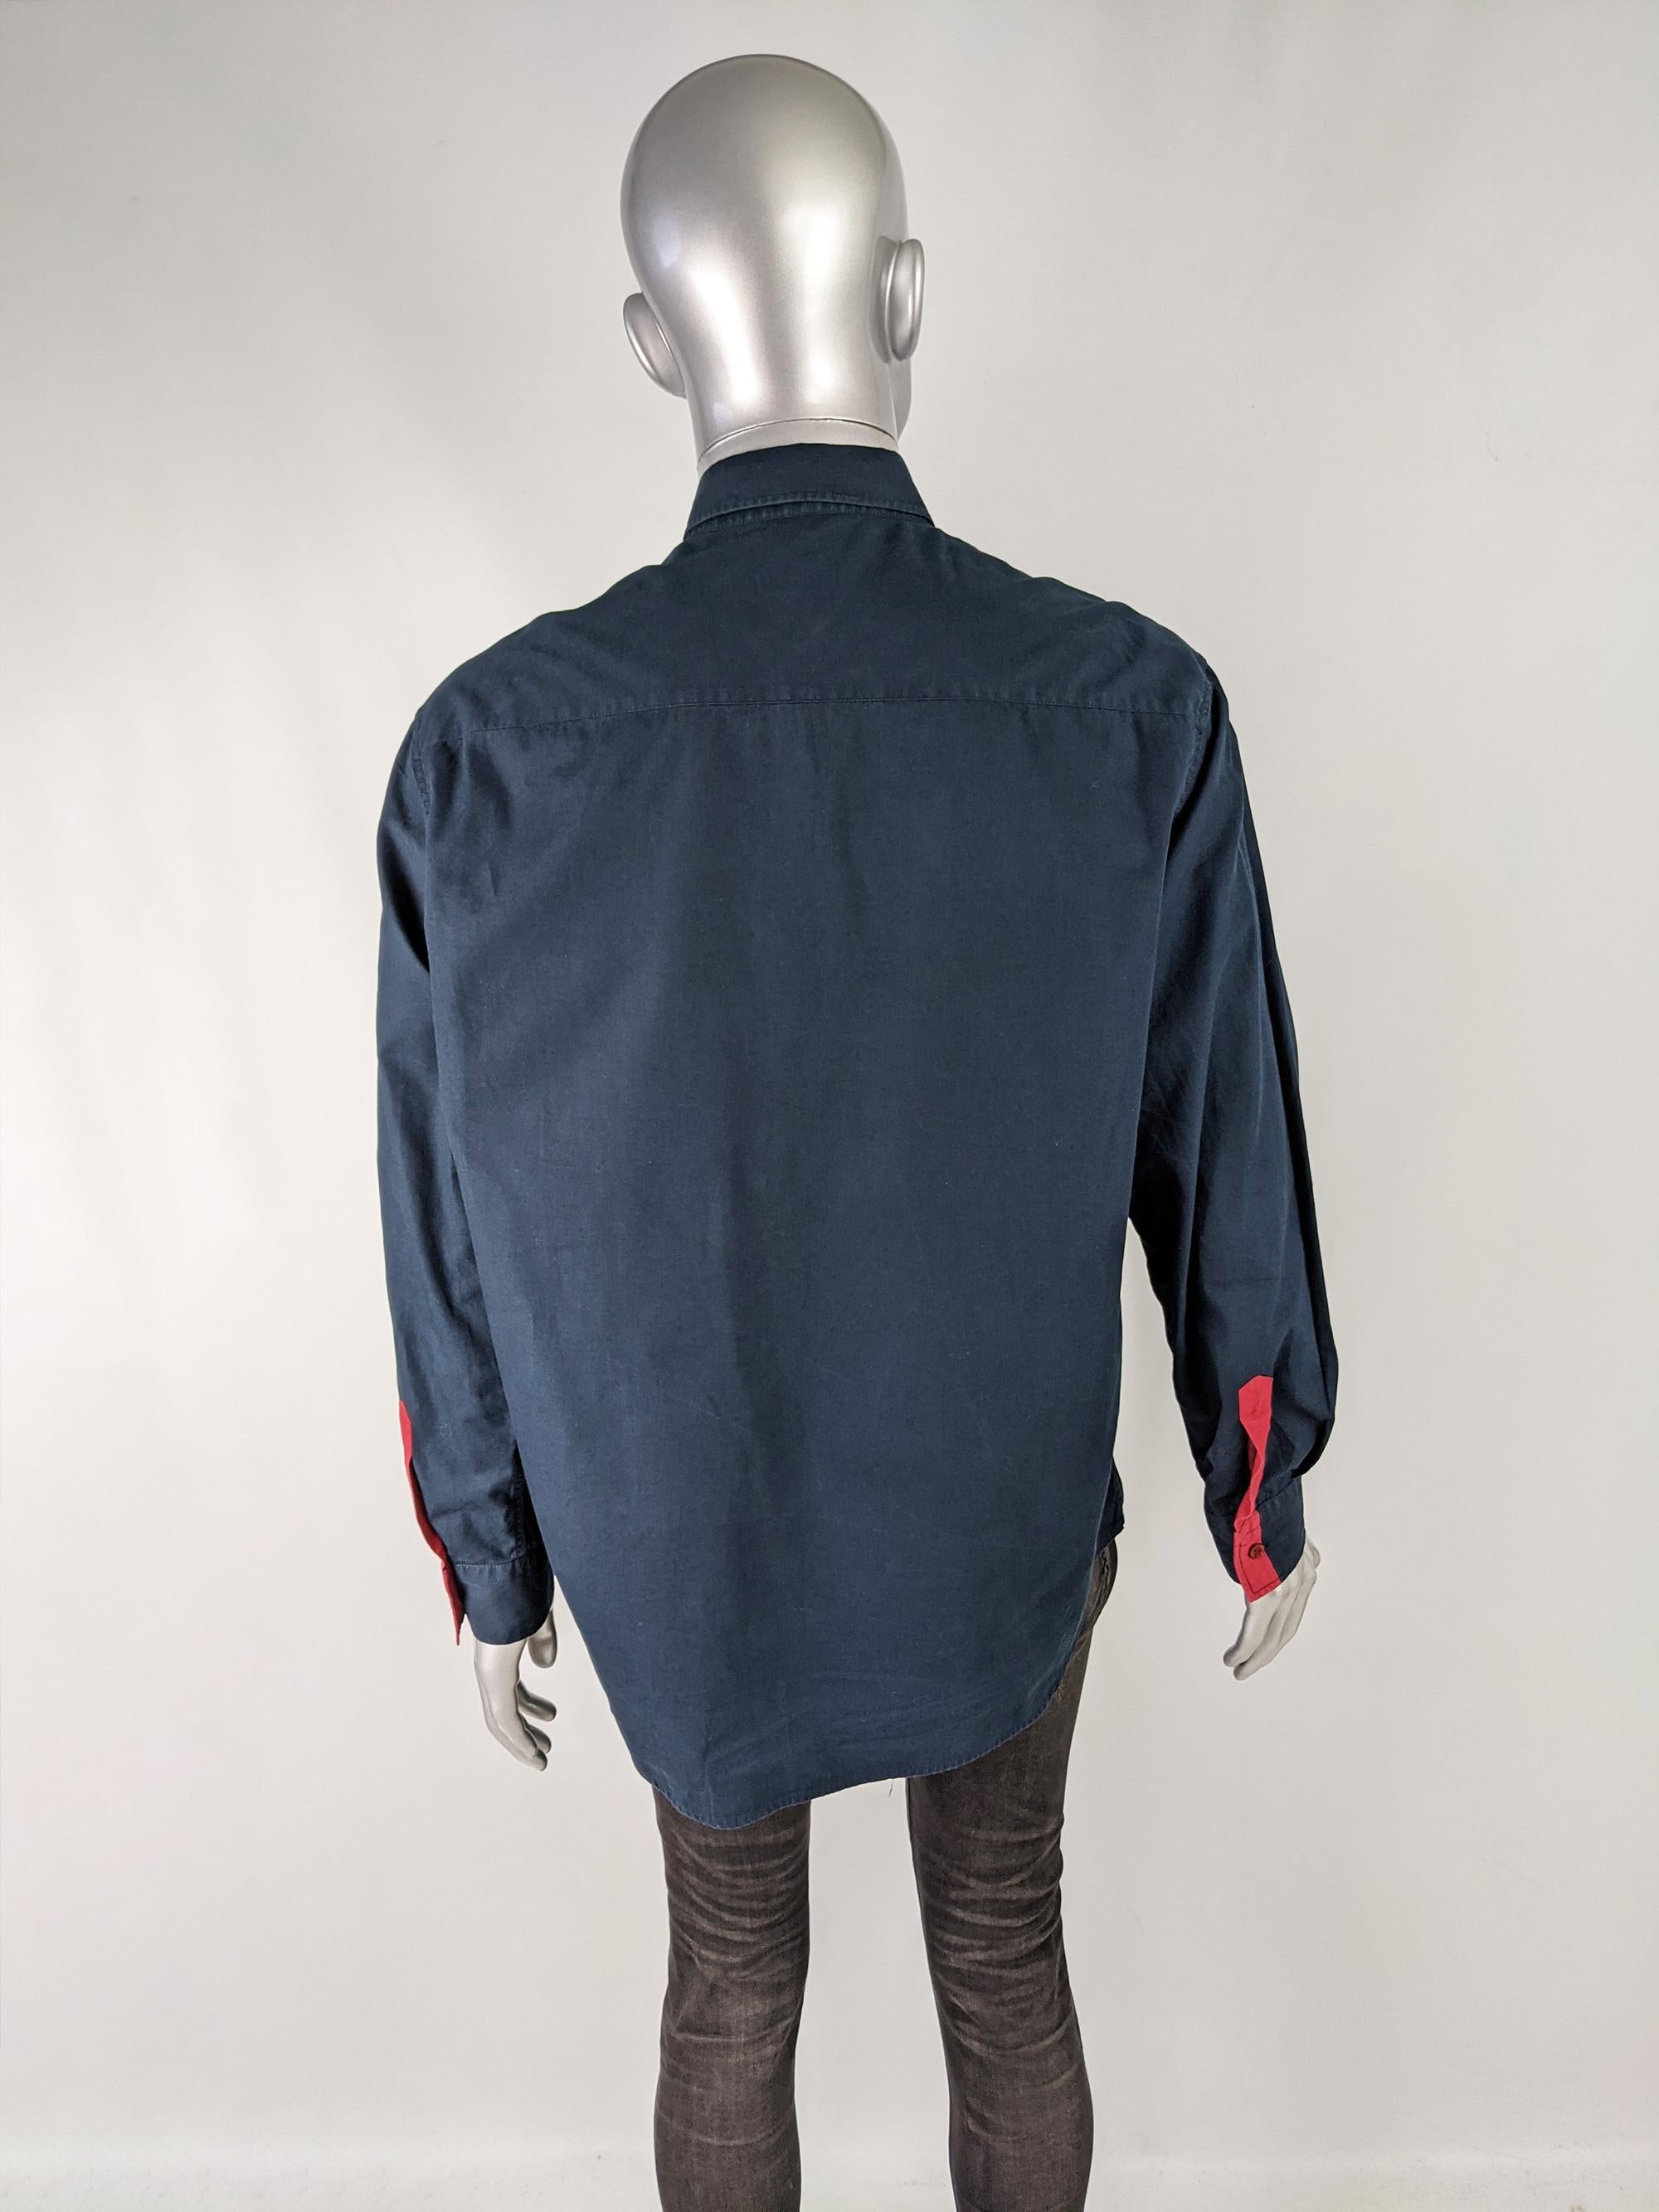 Men's Moschino Vintage Navy Blue & Red Shirt 1990s Long Sleeve Shirt Buttoned Shirt For Sale